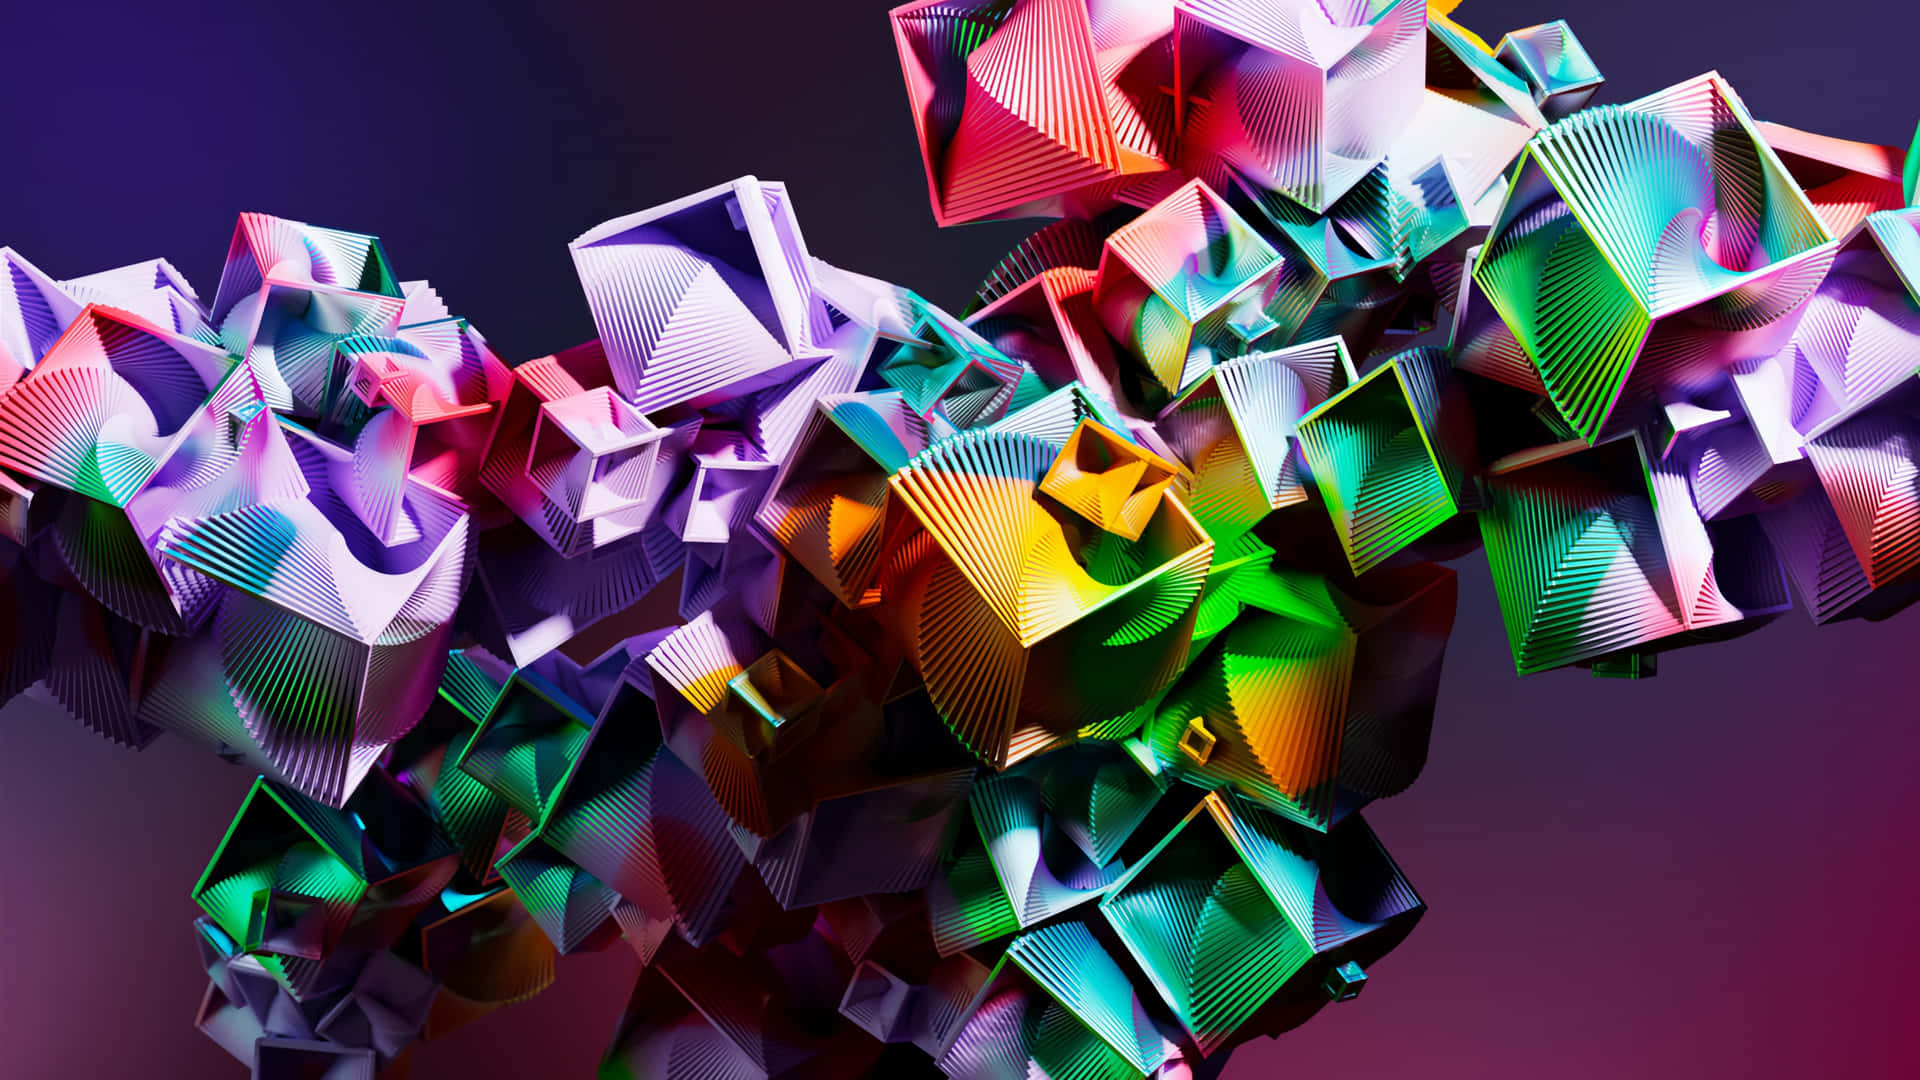 Abstract Colorful Geometric Shapes Wallpaper